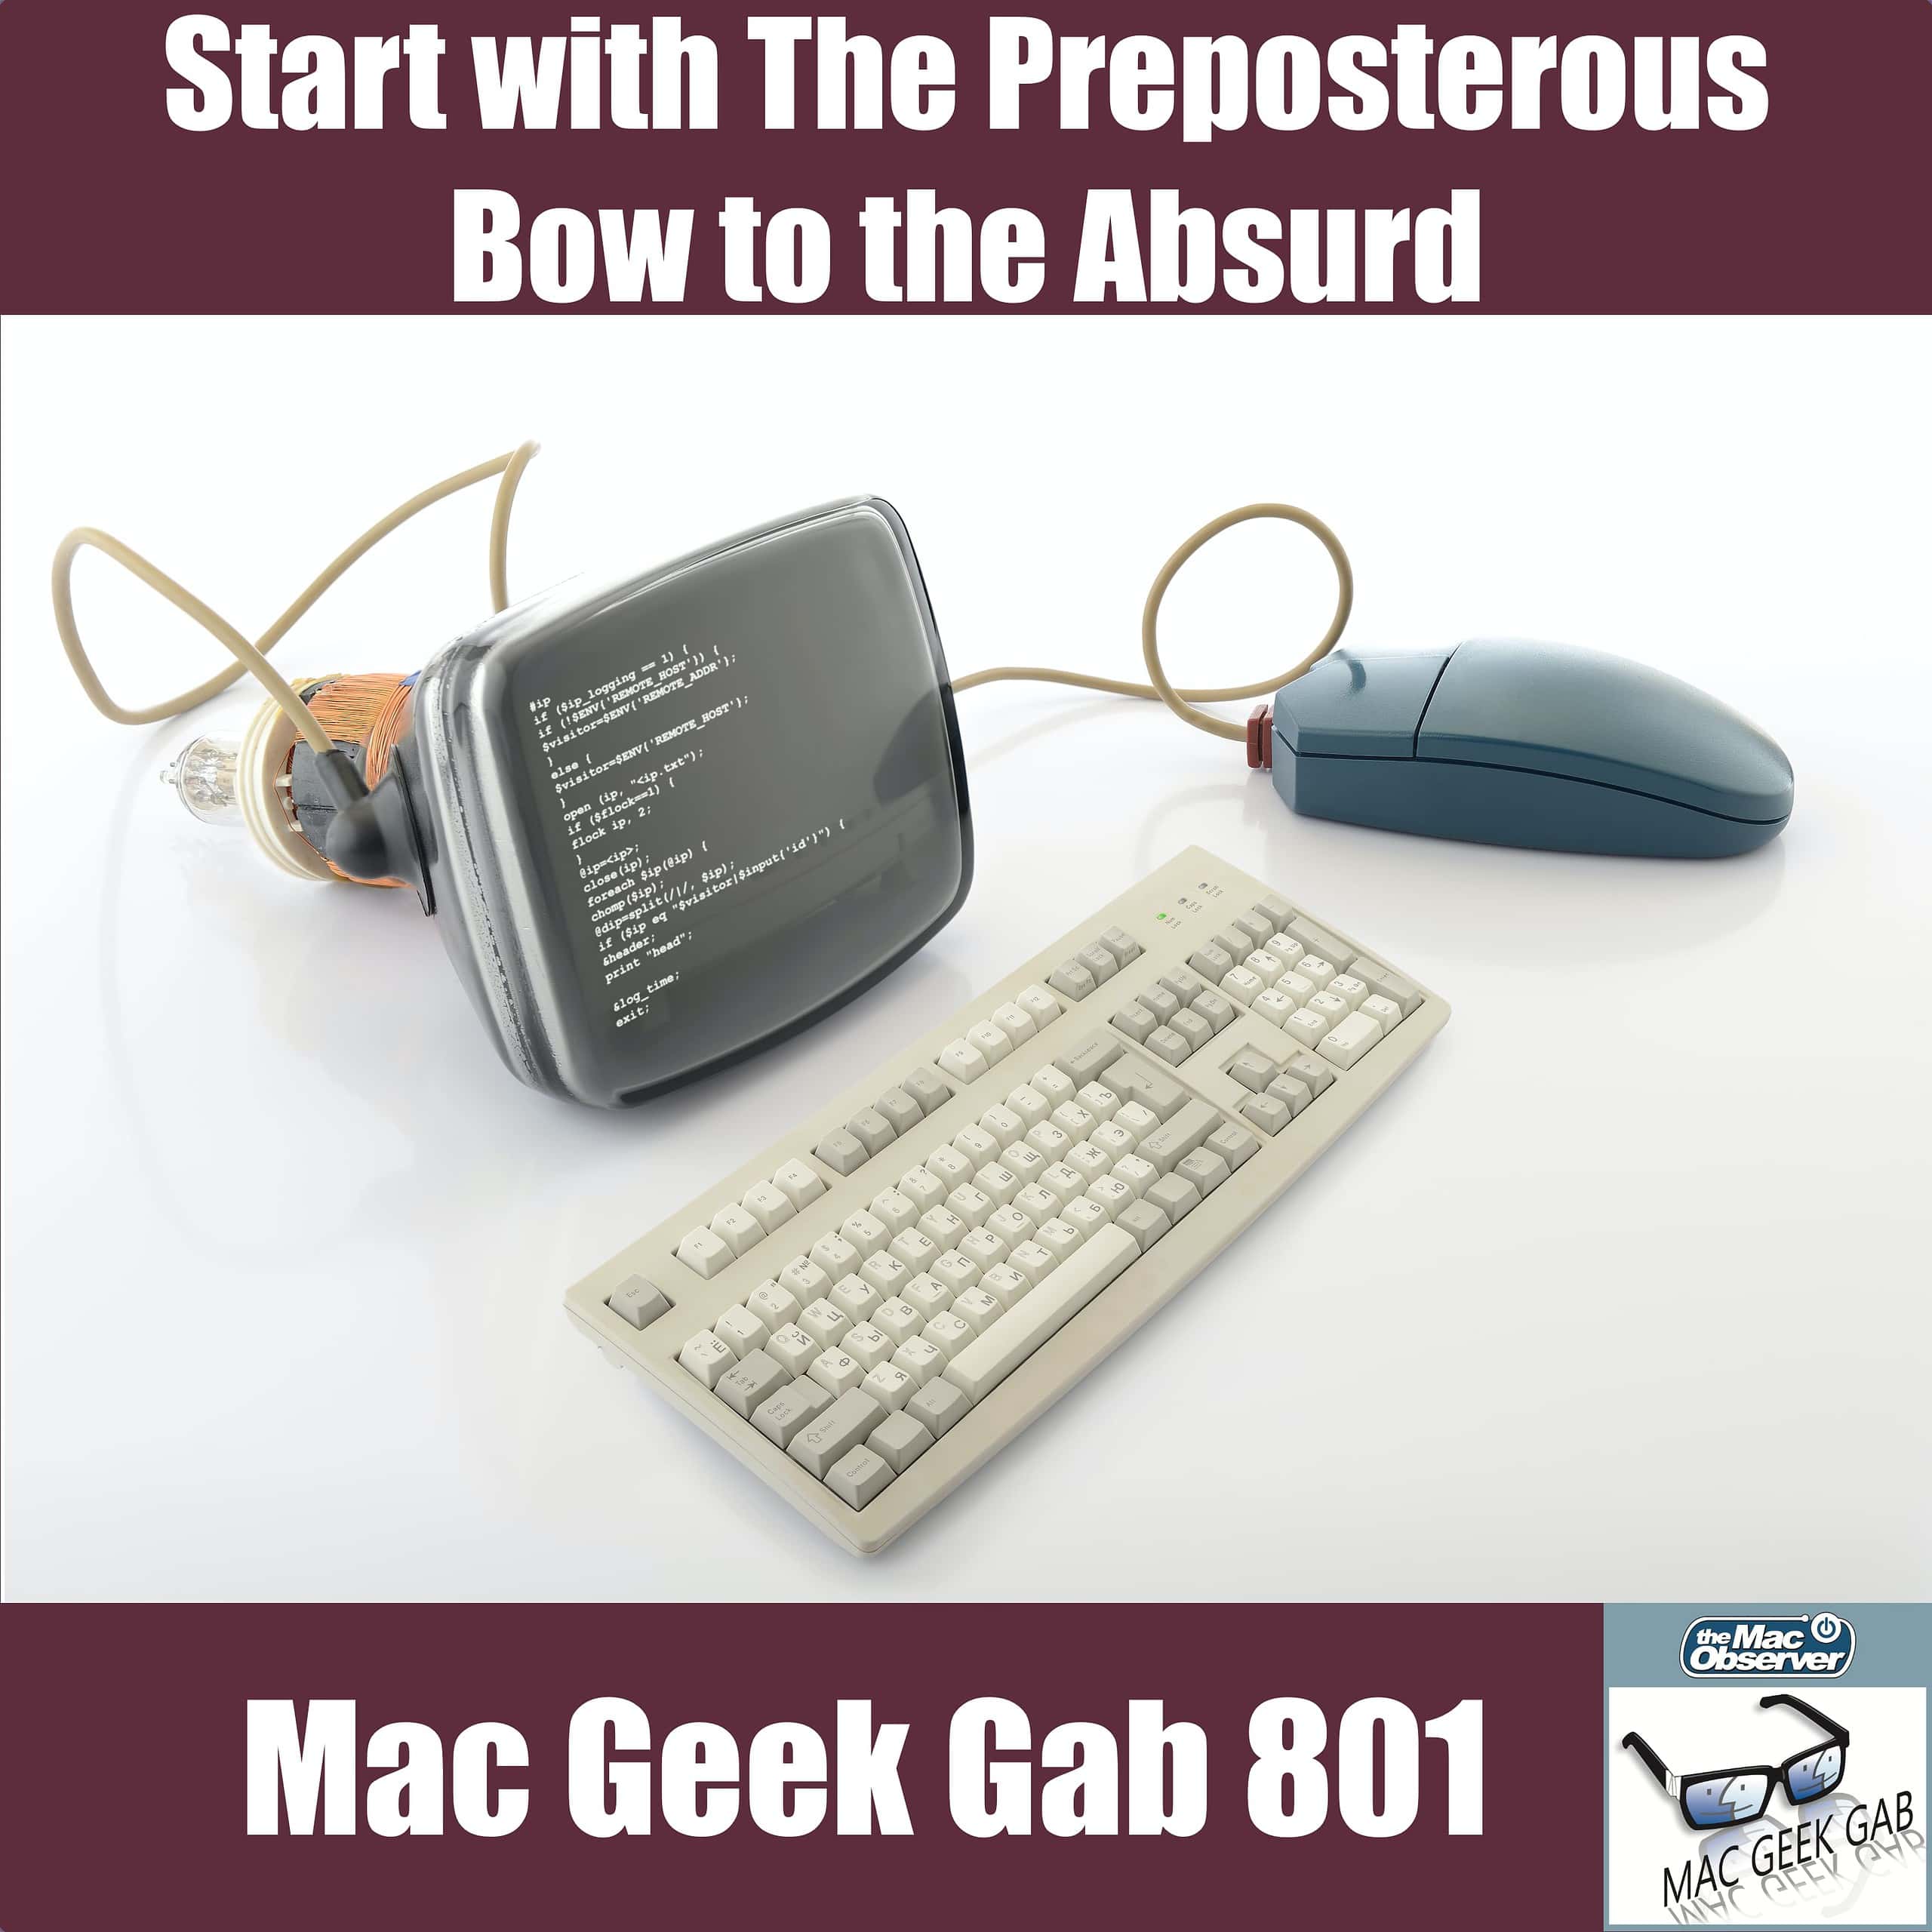 Start with The Preposterous, Bow to The Absurd – Mac Geek Gab 801